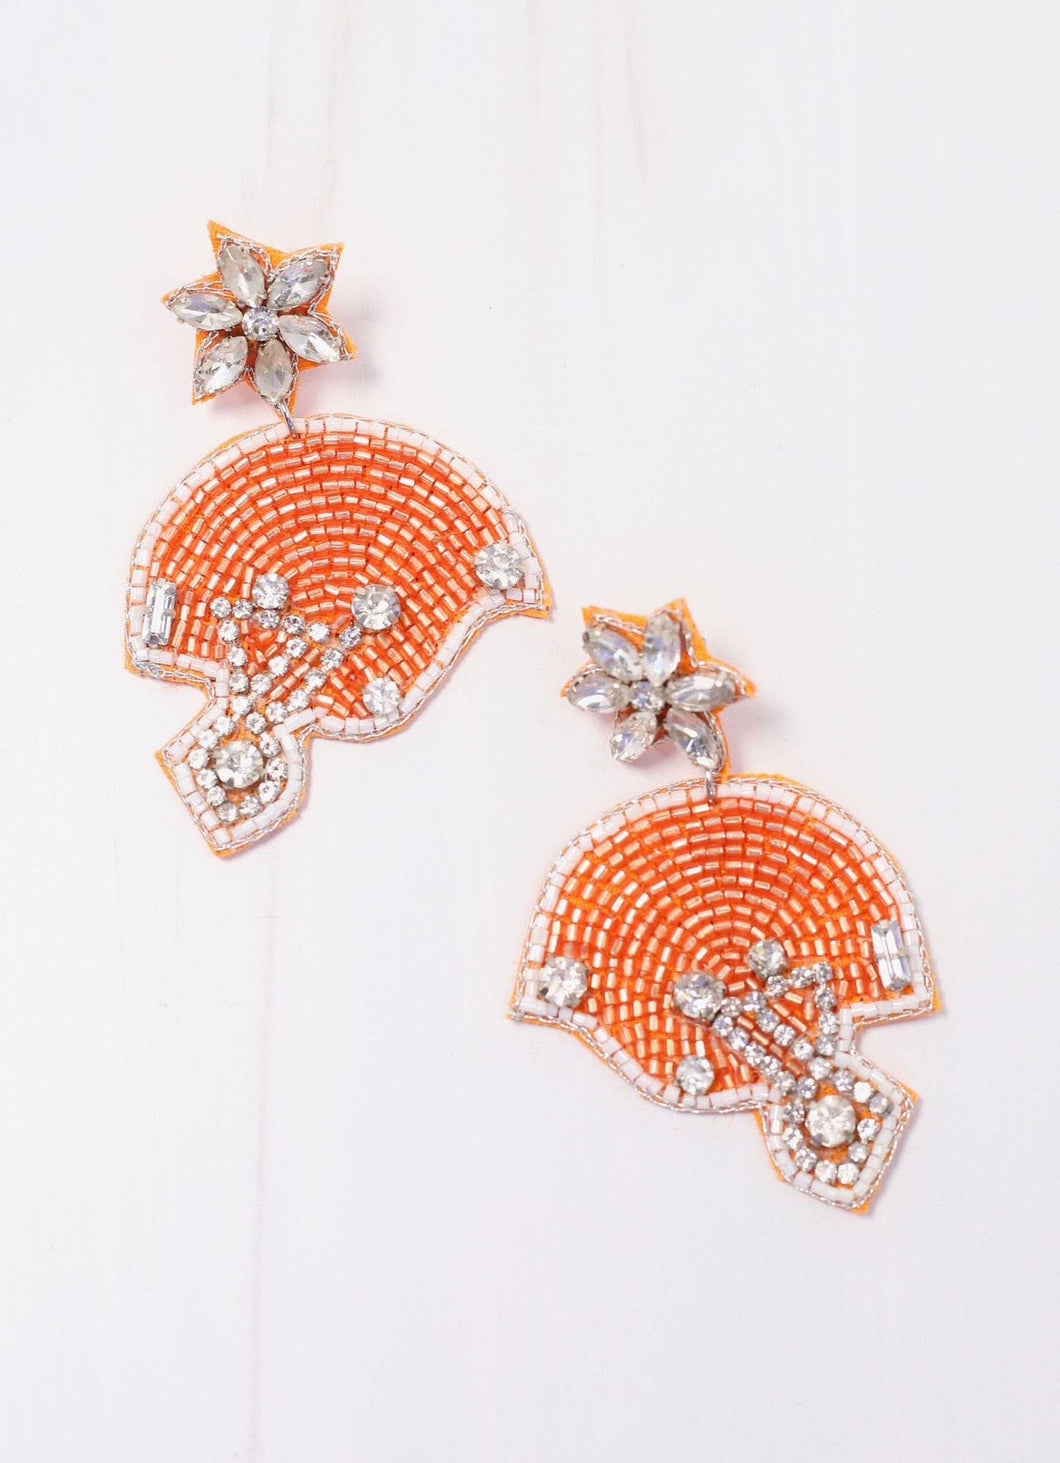 Beaded and embellished orange and white football helmet earrings perfect for gamedays and tailgates